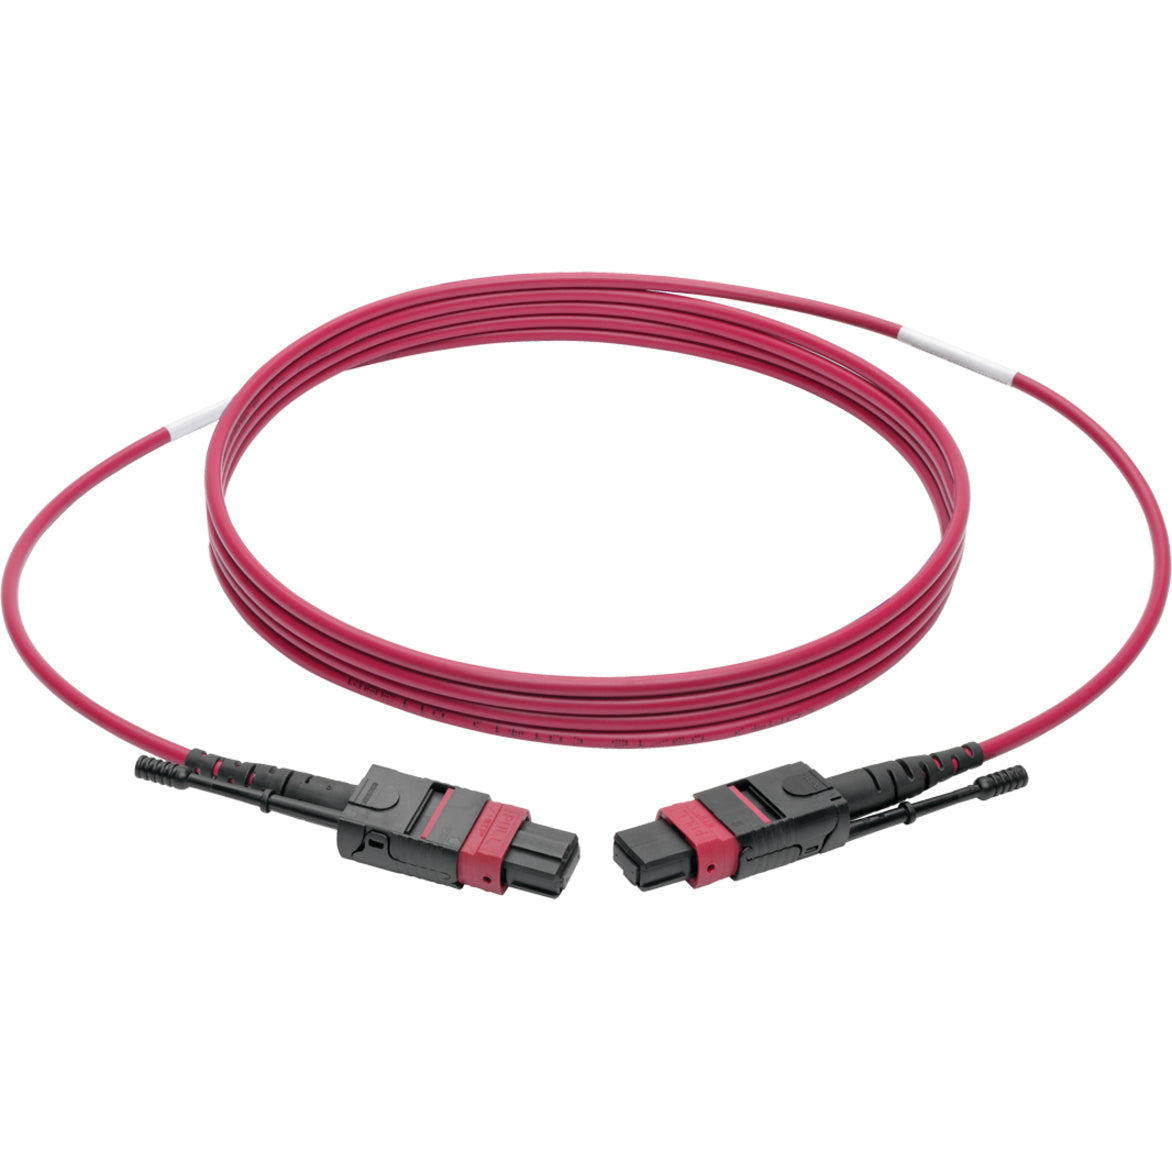 Tripp Lite N845-03M-12-MG MTP/MPO Multimode Patch Cable, Magenta, 3m, 40Gbit/s